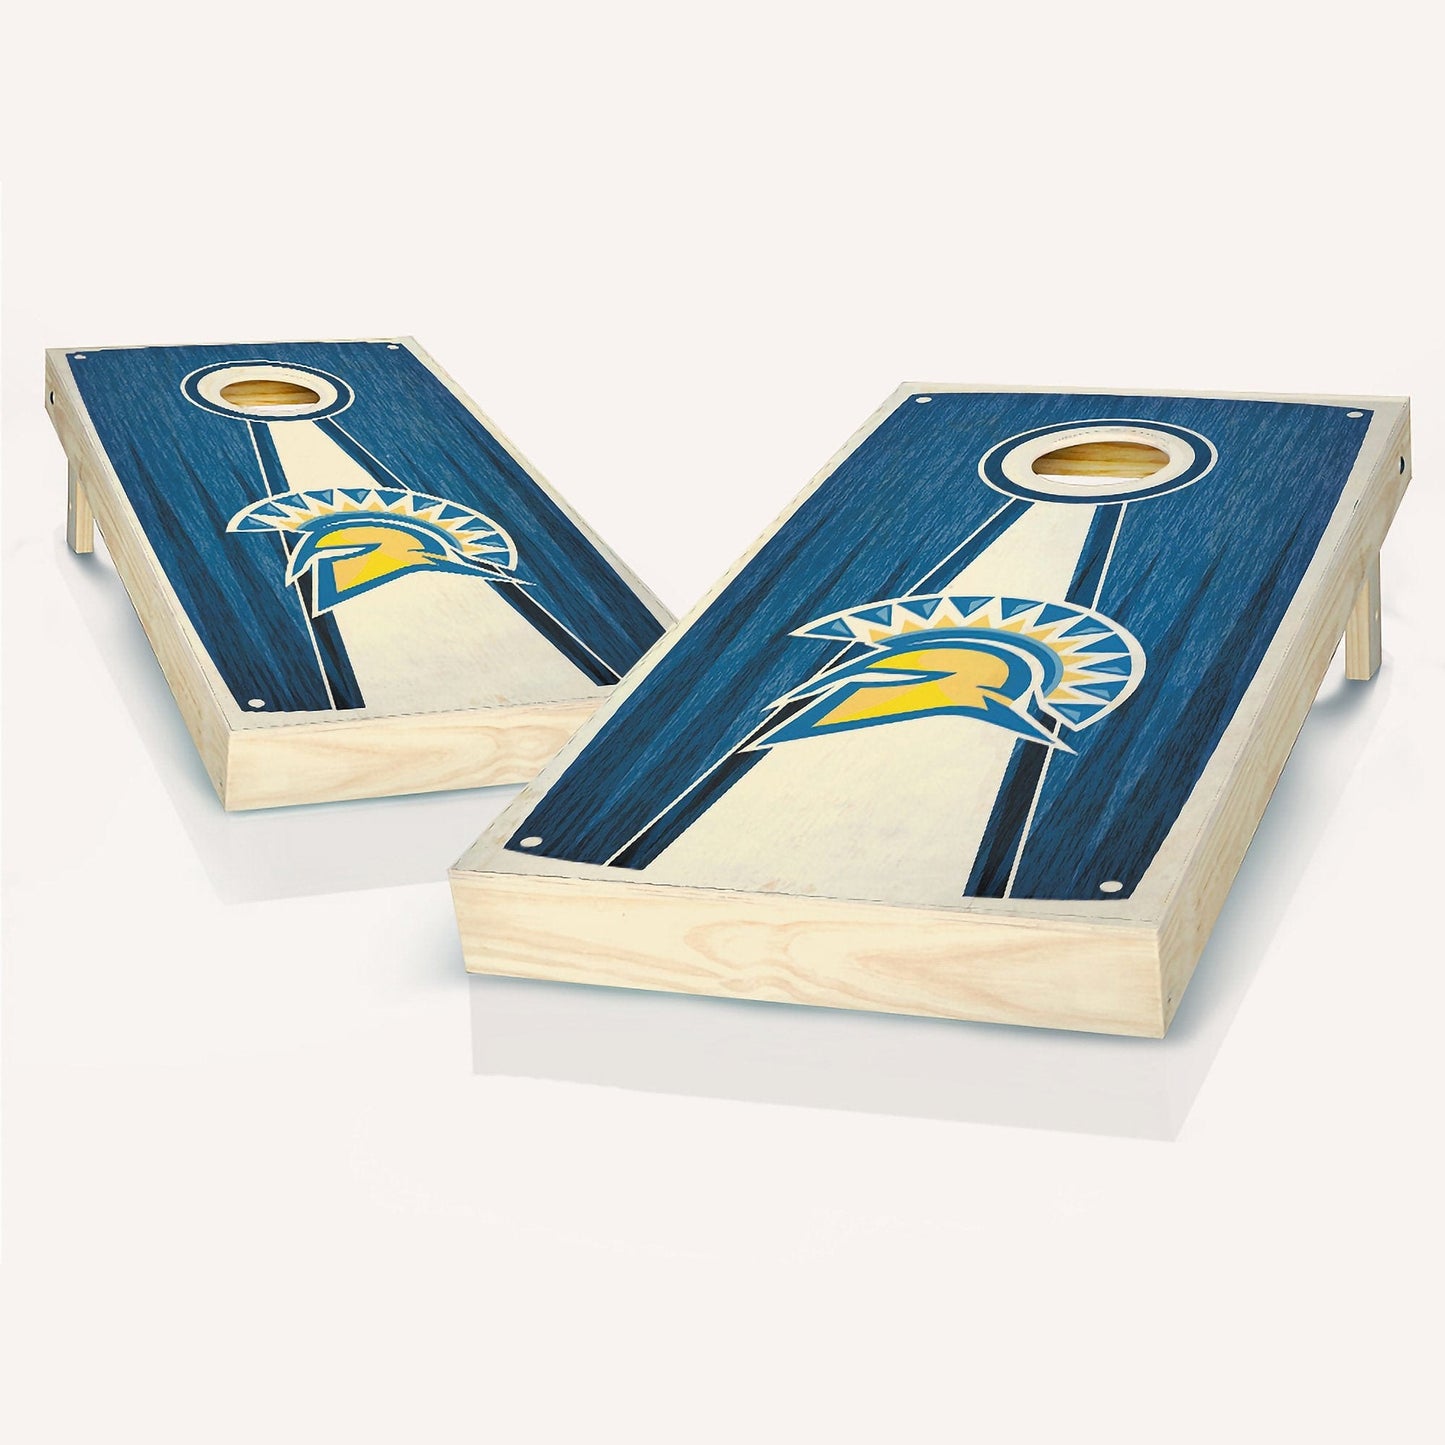 San Jose State Stained Pyramid Cornhole Boards